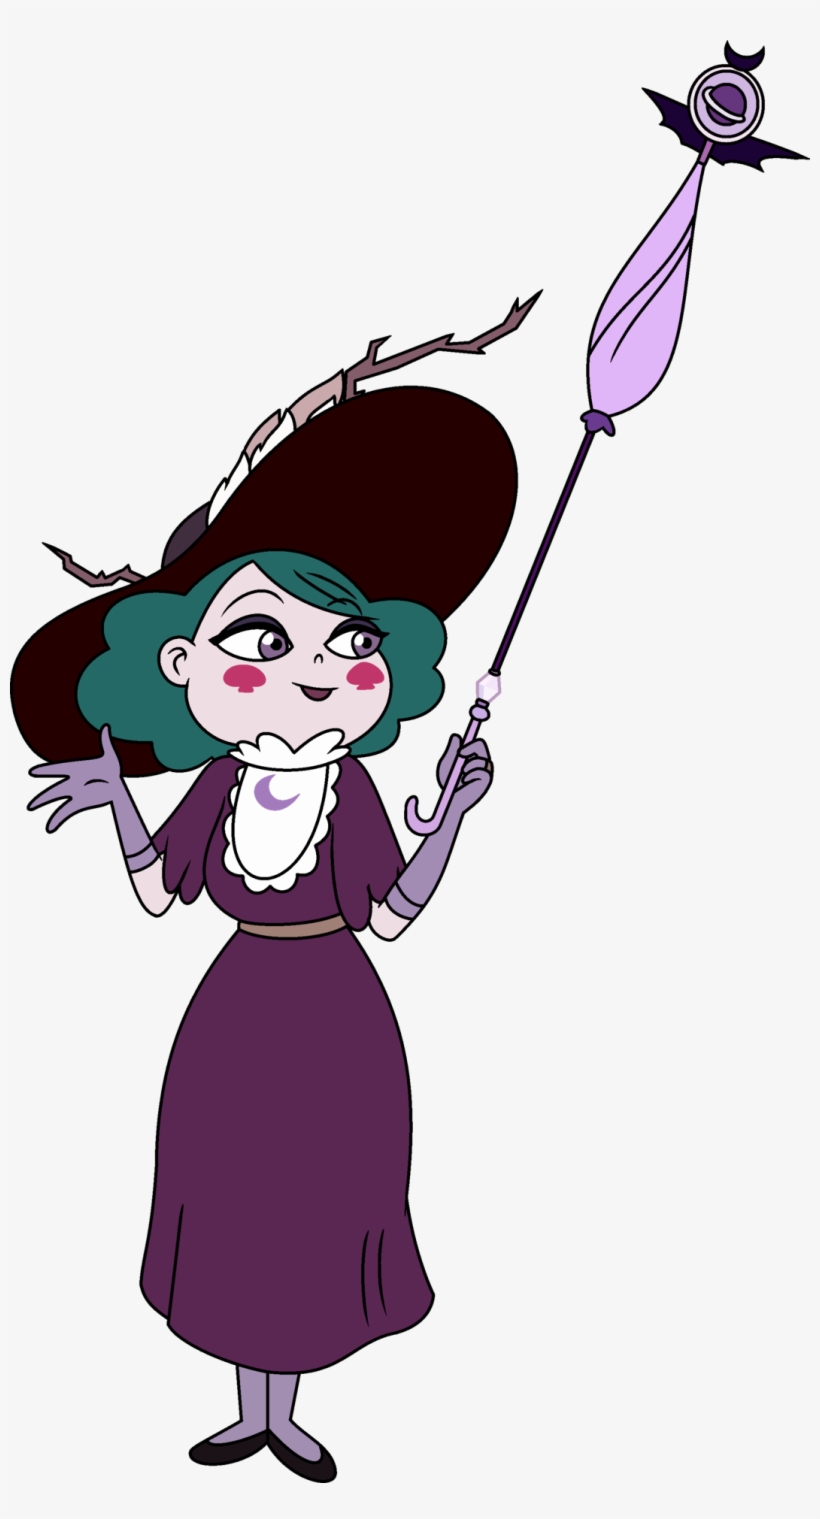 Star Vs The Forces Of Evil Eclipsa Butterfly Eclipsa - Star Vs The Forces Of Evil Eclipsa, transparent png #3470141